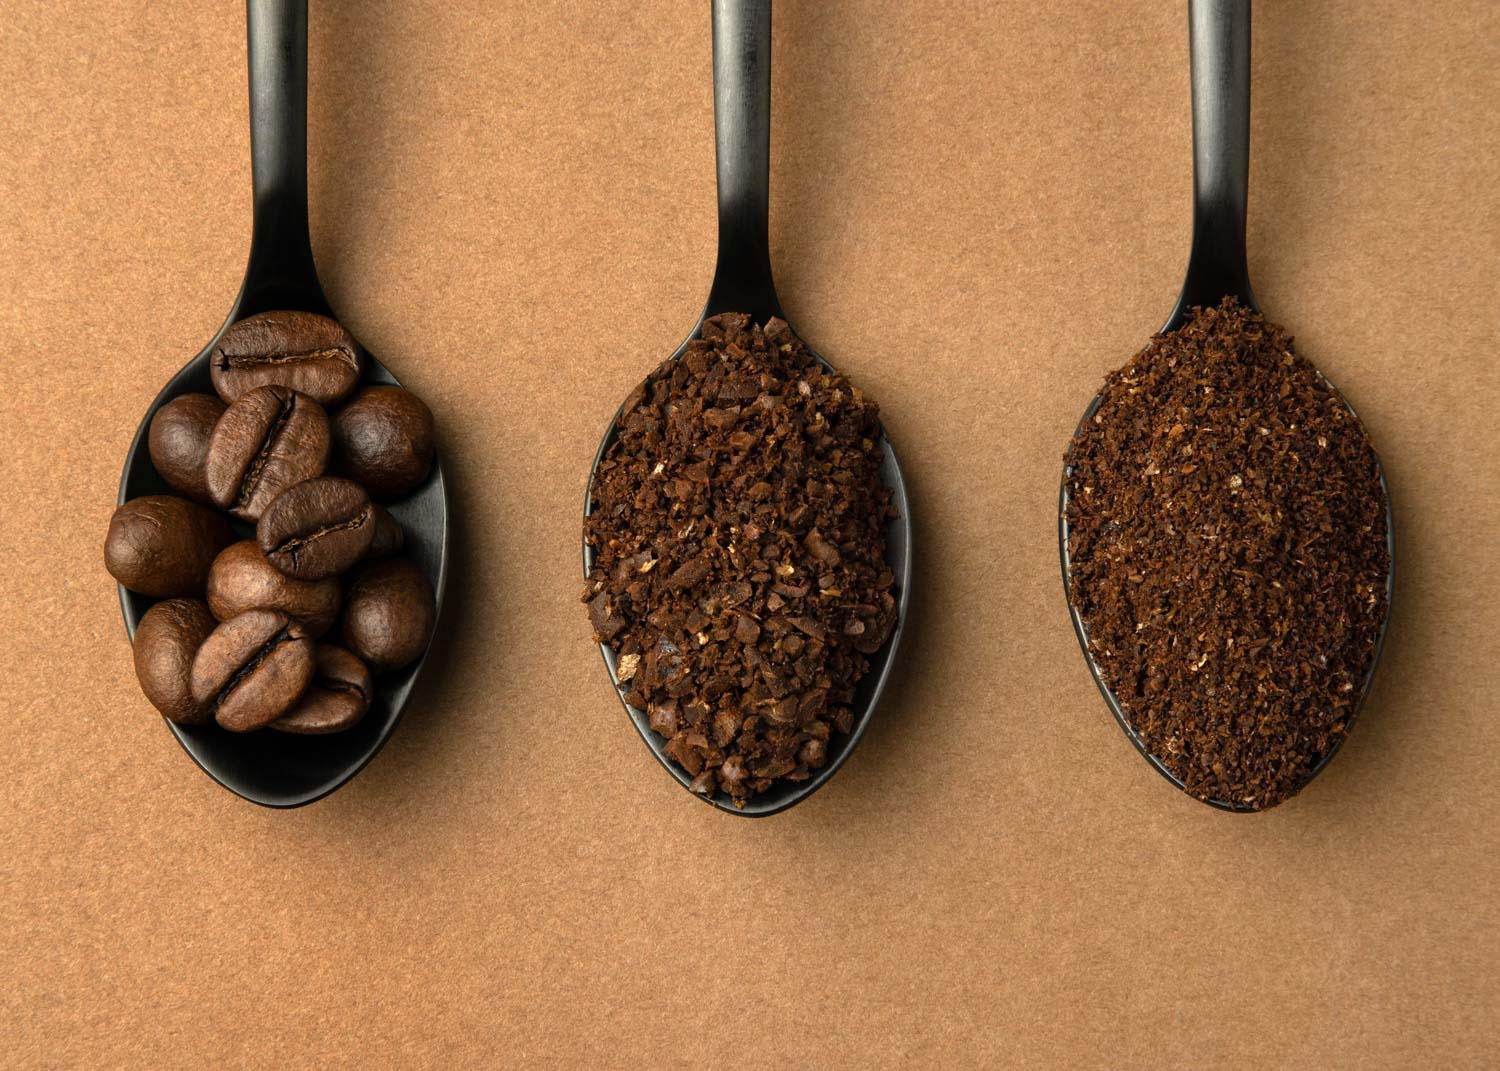 How to measure coffee and make a perfect cup of coffee.